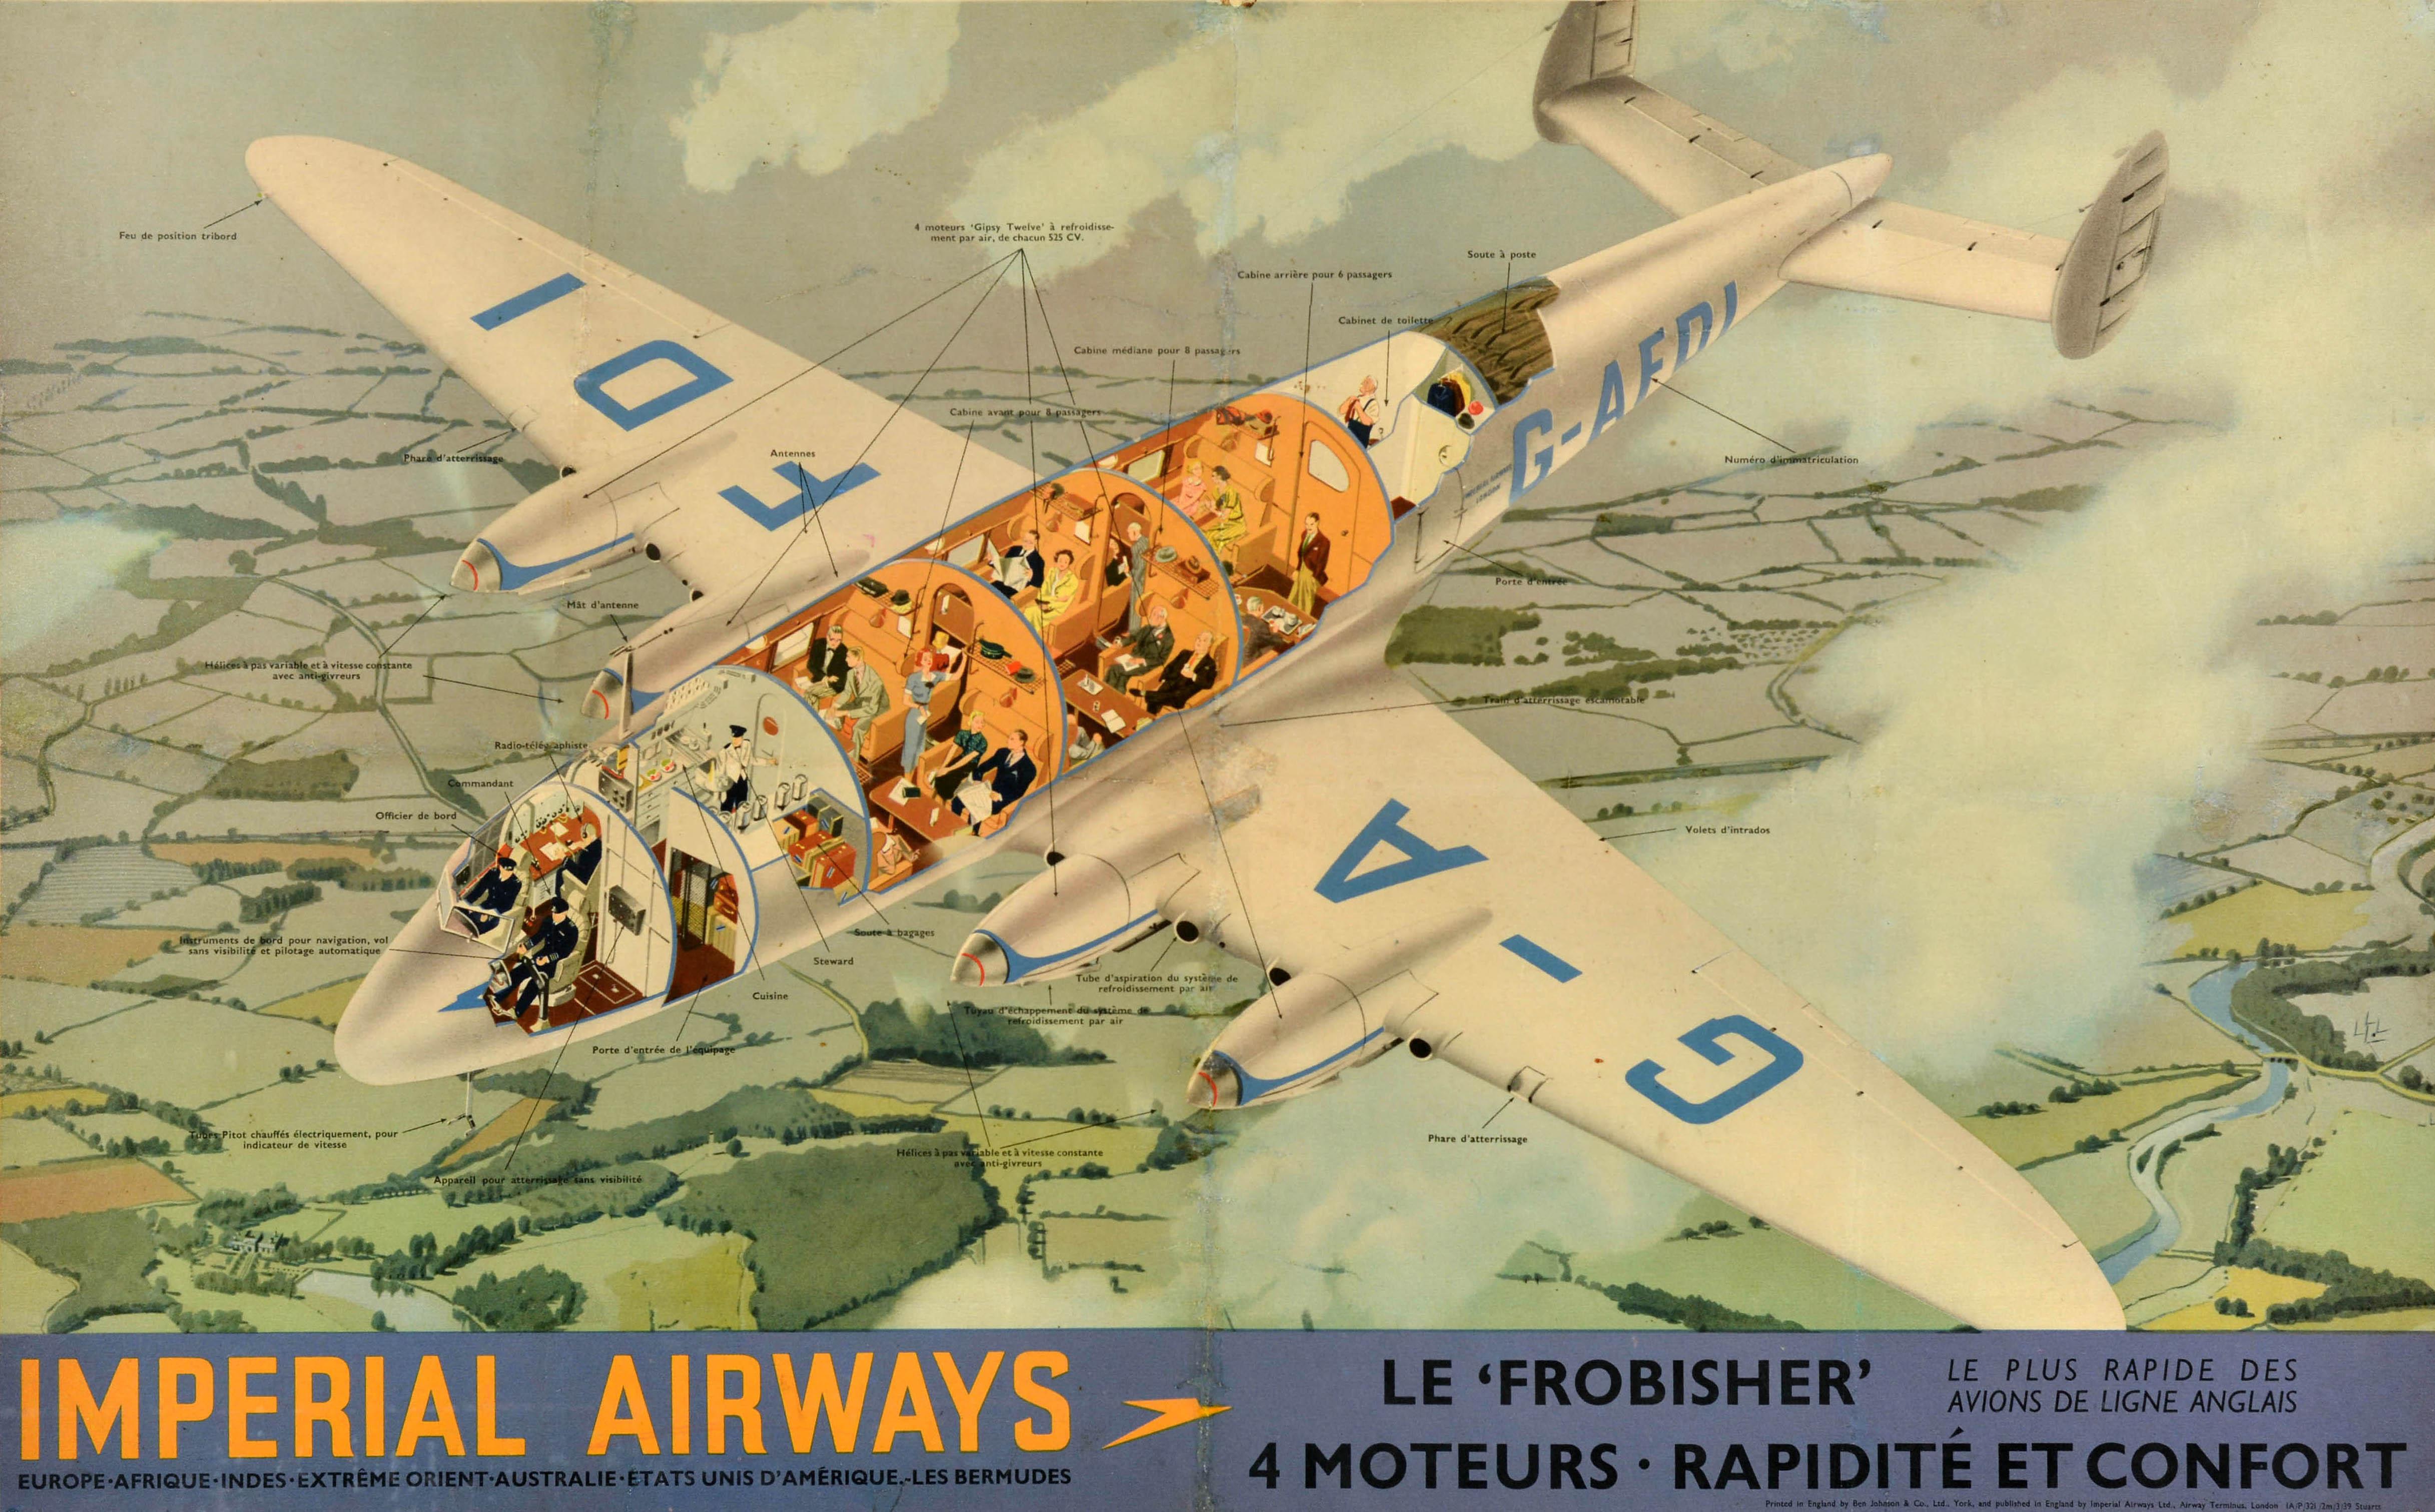 Original Vintage Travel Advertising Poster Imperial Airways Le Frobisher Design - Print by Unknown